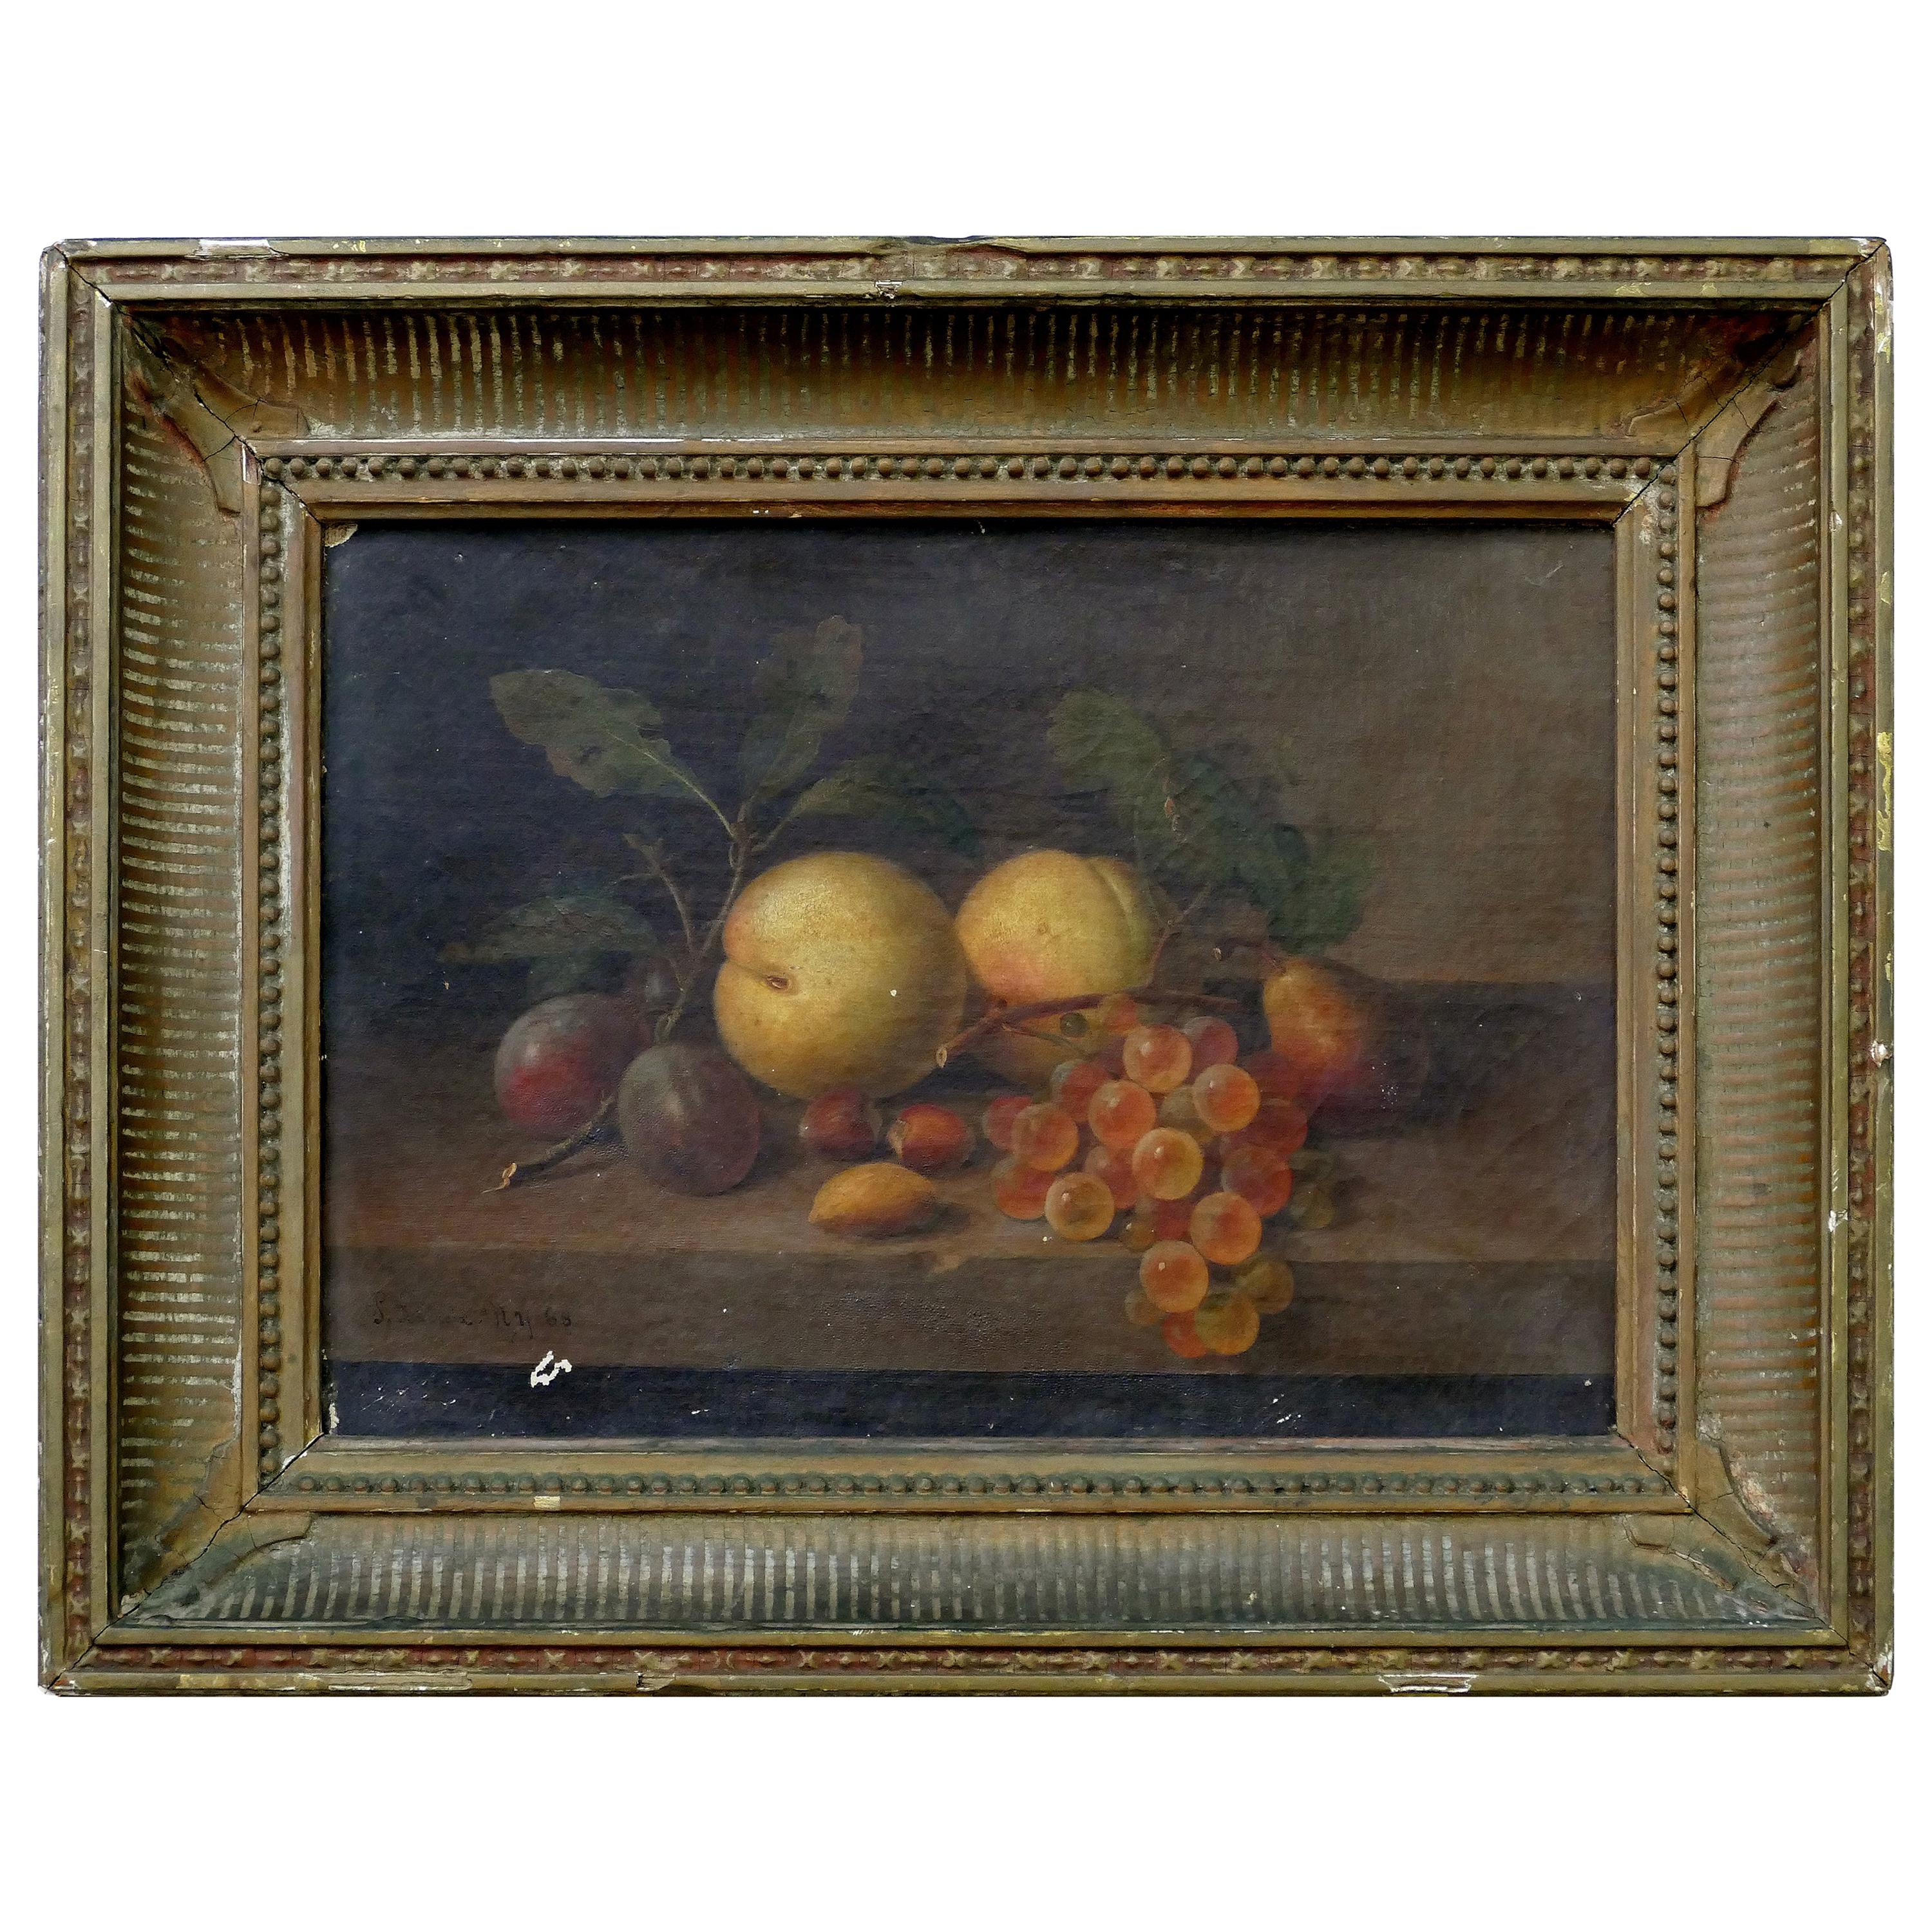 Paul LaCroix Fruit Still-Life Oil Painting on Canvas, 1865 in Original Frame